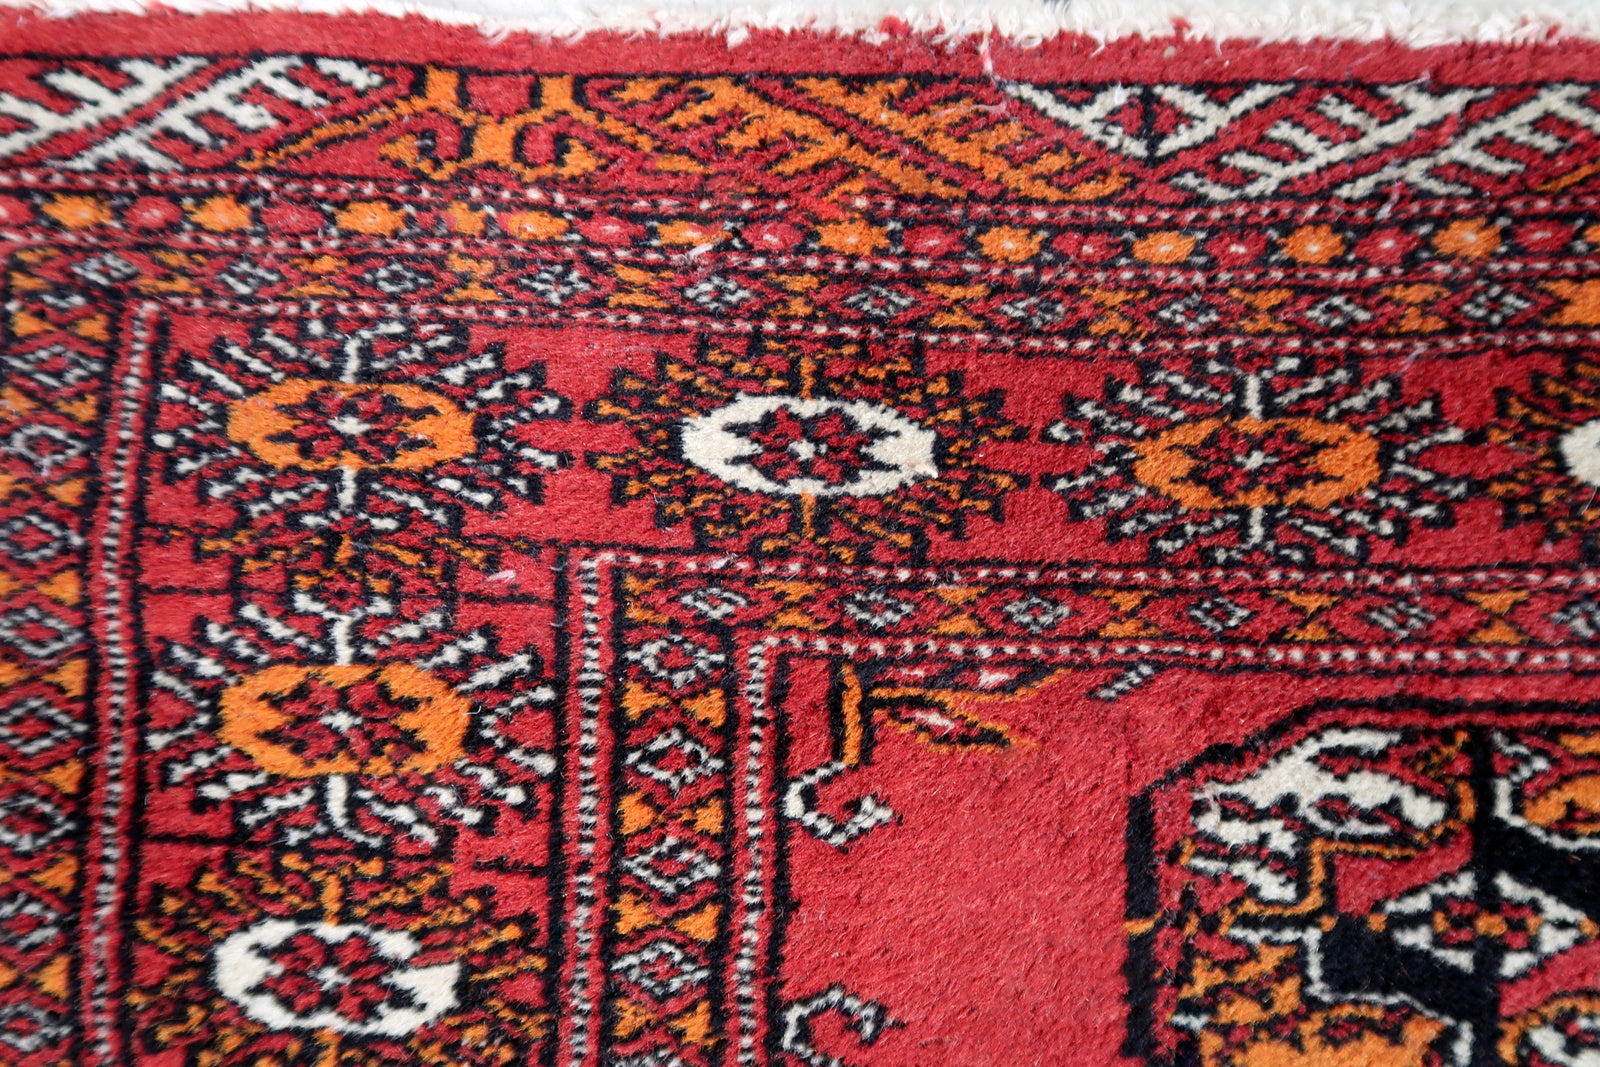 Handmade vintage Uzbek Bukhara rug in traditional design and red wool. The rug is from the end of 20th century. It is in original condition, has some low pile.